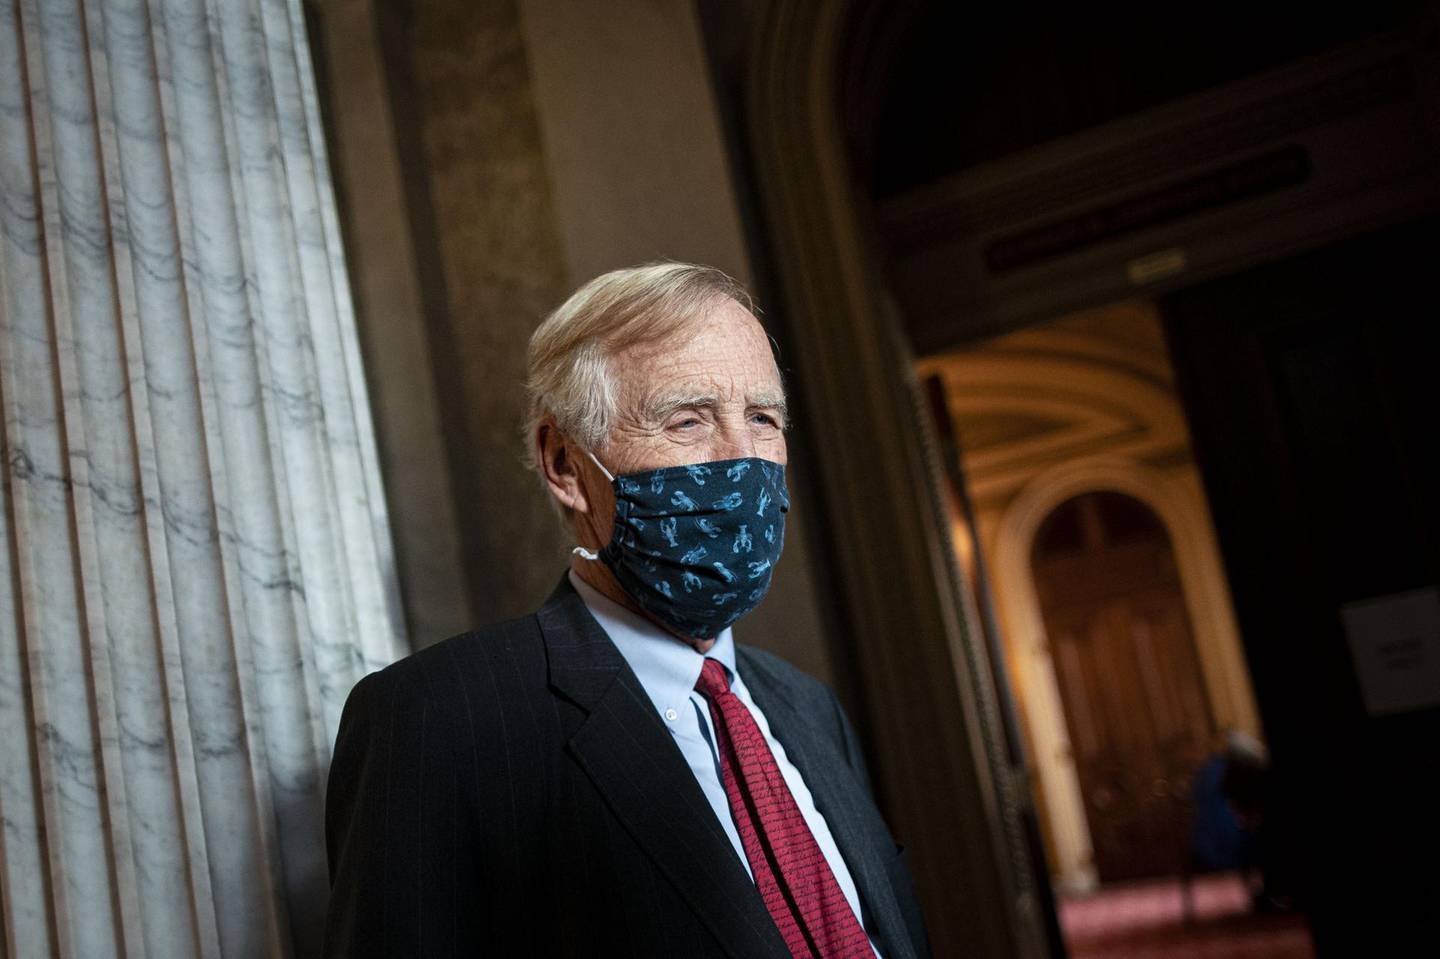 Senator Angus King, an Independent from Maine, wears a protective mask as he speaks to a member of the media at the U.S. Capitol in Washington, D.C., U.S., on Wednesday, Dec. 9, 2020. Treasury Secretary Mnuchin made a surprise re-entry into talks on a 2020 pandemic-relief package with a $916 billion proposal that opened a potential new path to a year-end deal despite objections from Democrats over elements of the plan. Photographer: Al Drago/Bloomberg